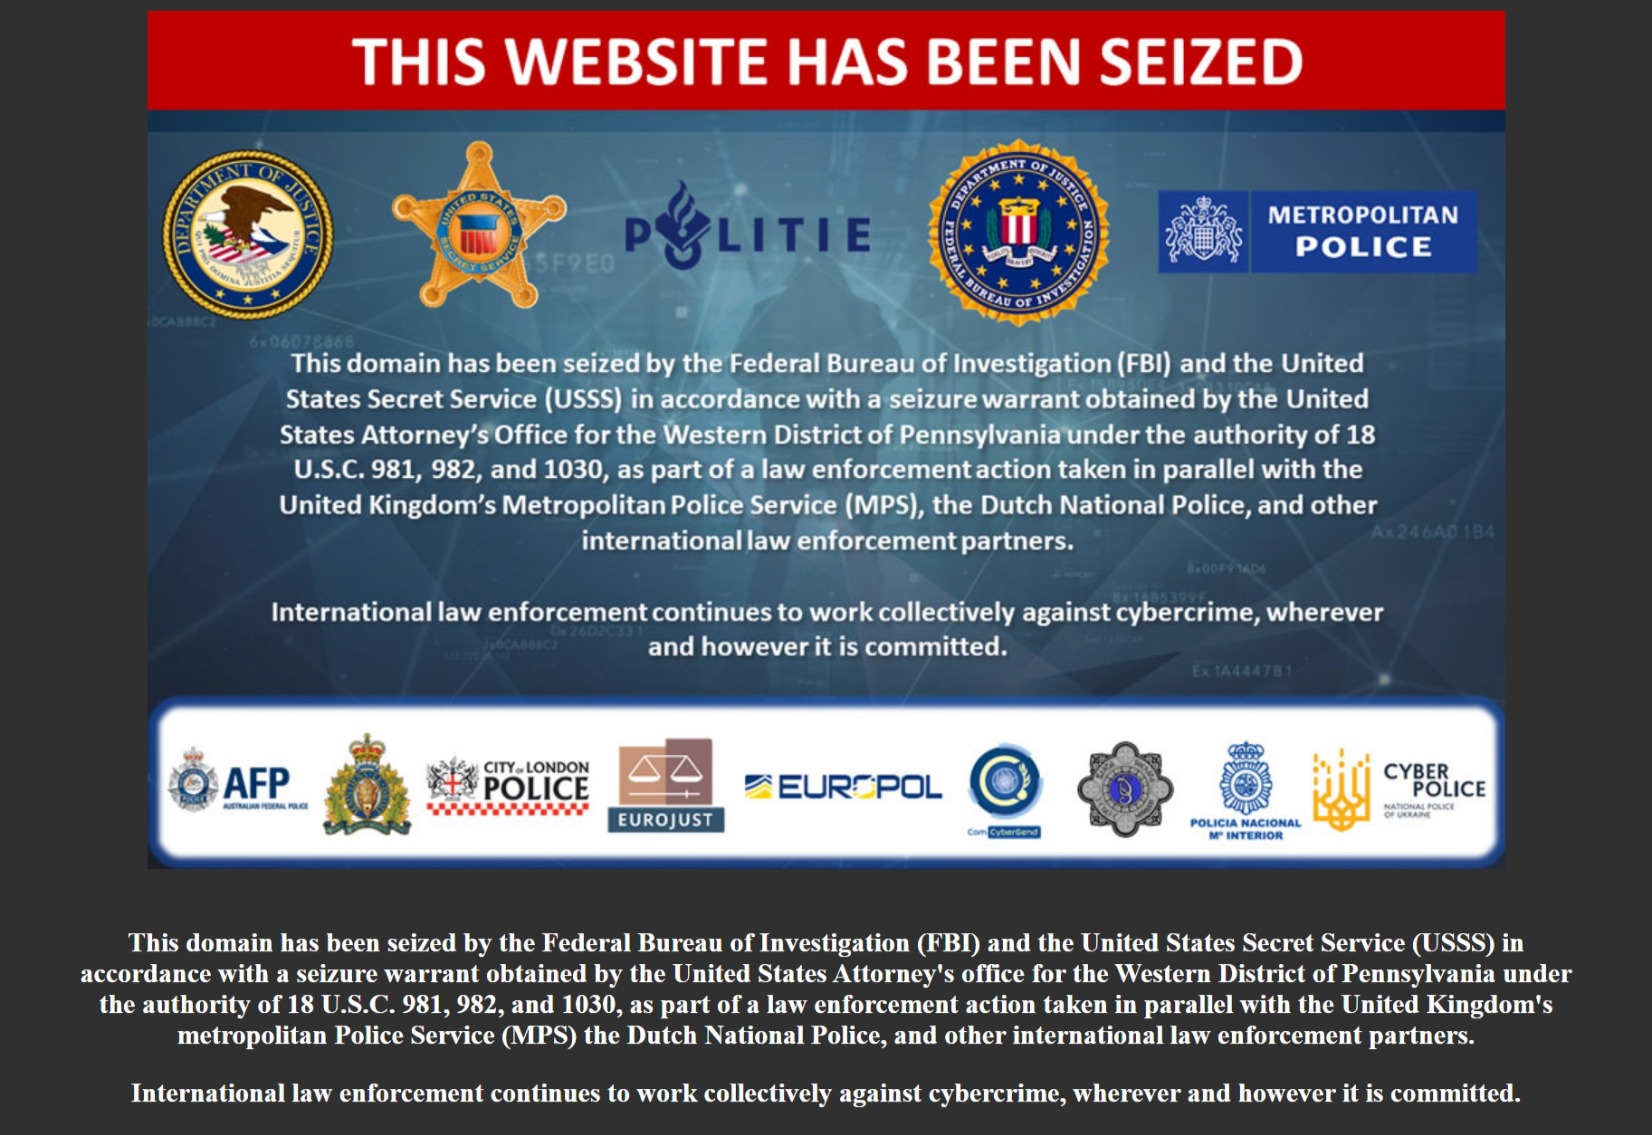 Internet users who go to ispoof.cc now see a notice that it has been seized by law enforcement.